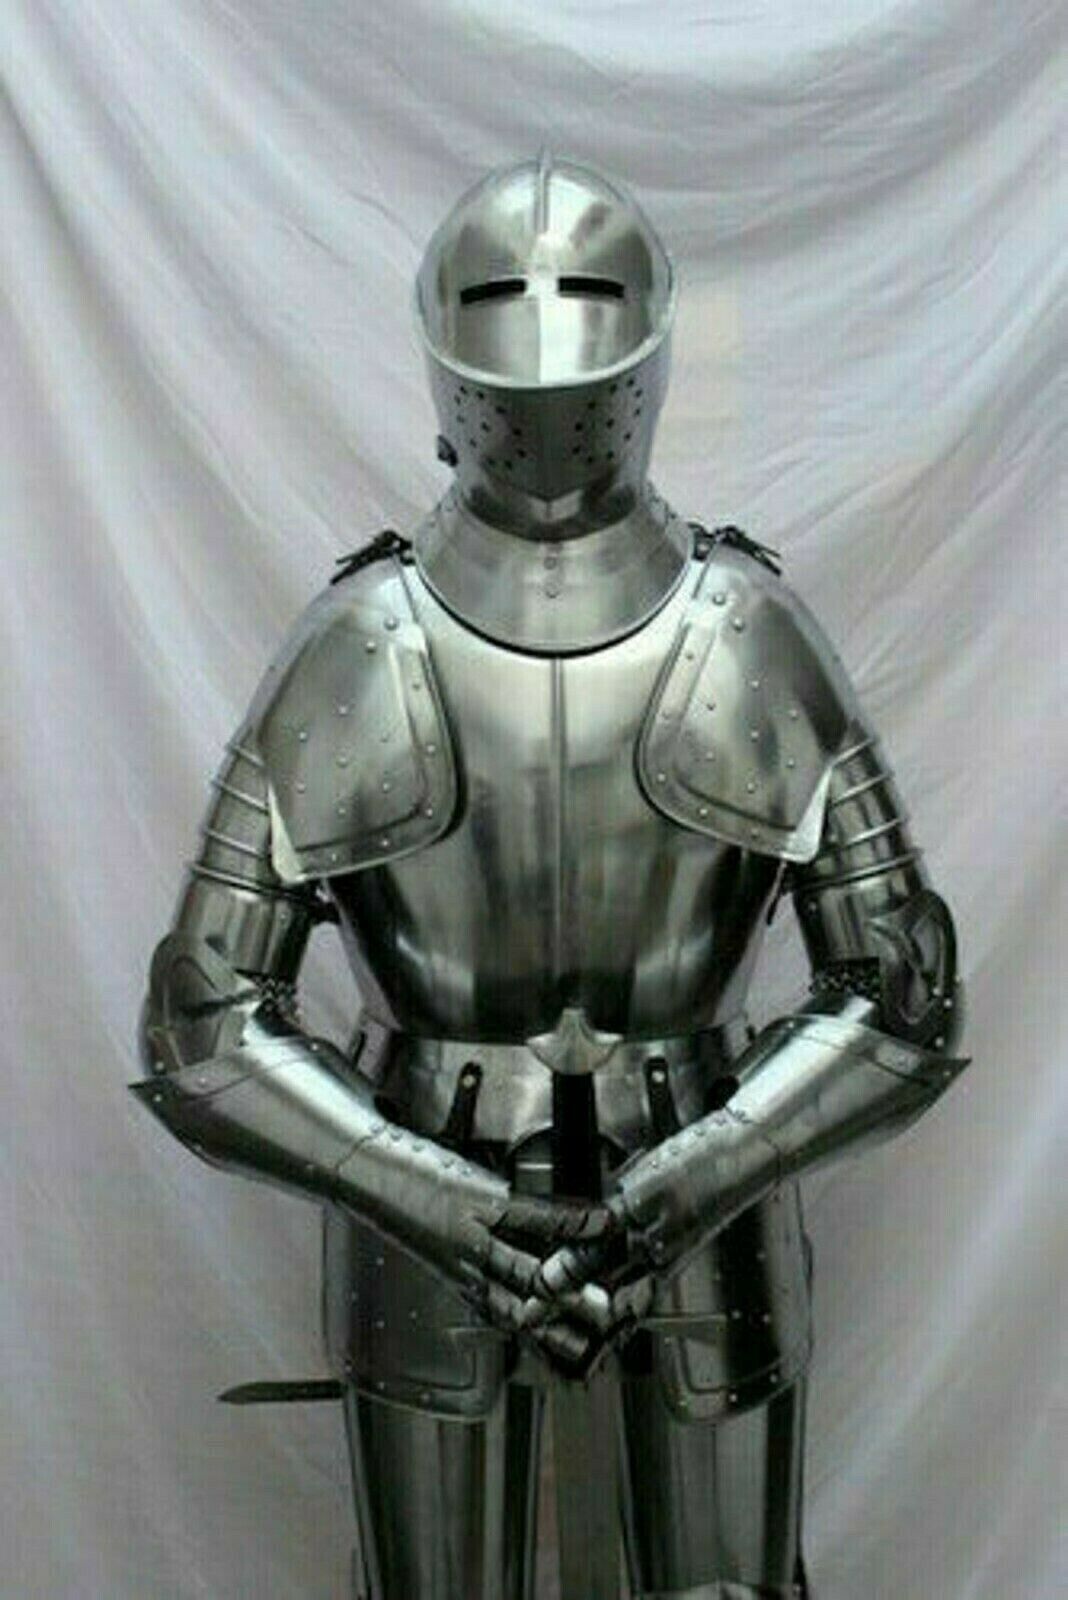 Armor Medieval knight suit of Armor crusader combat full body wearable Suit